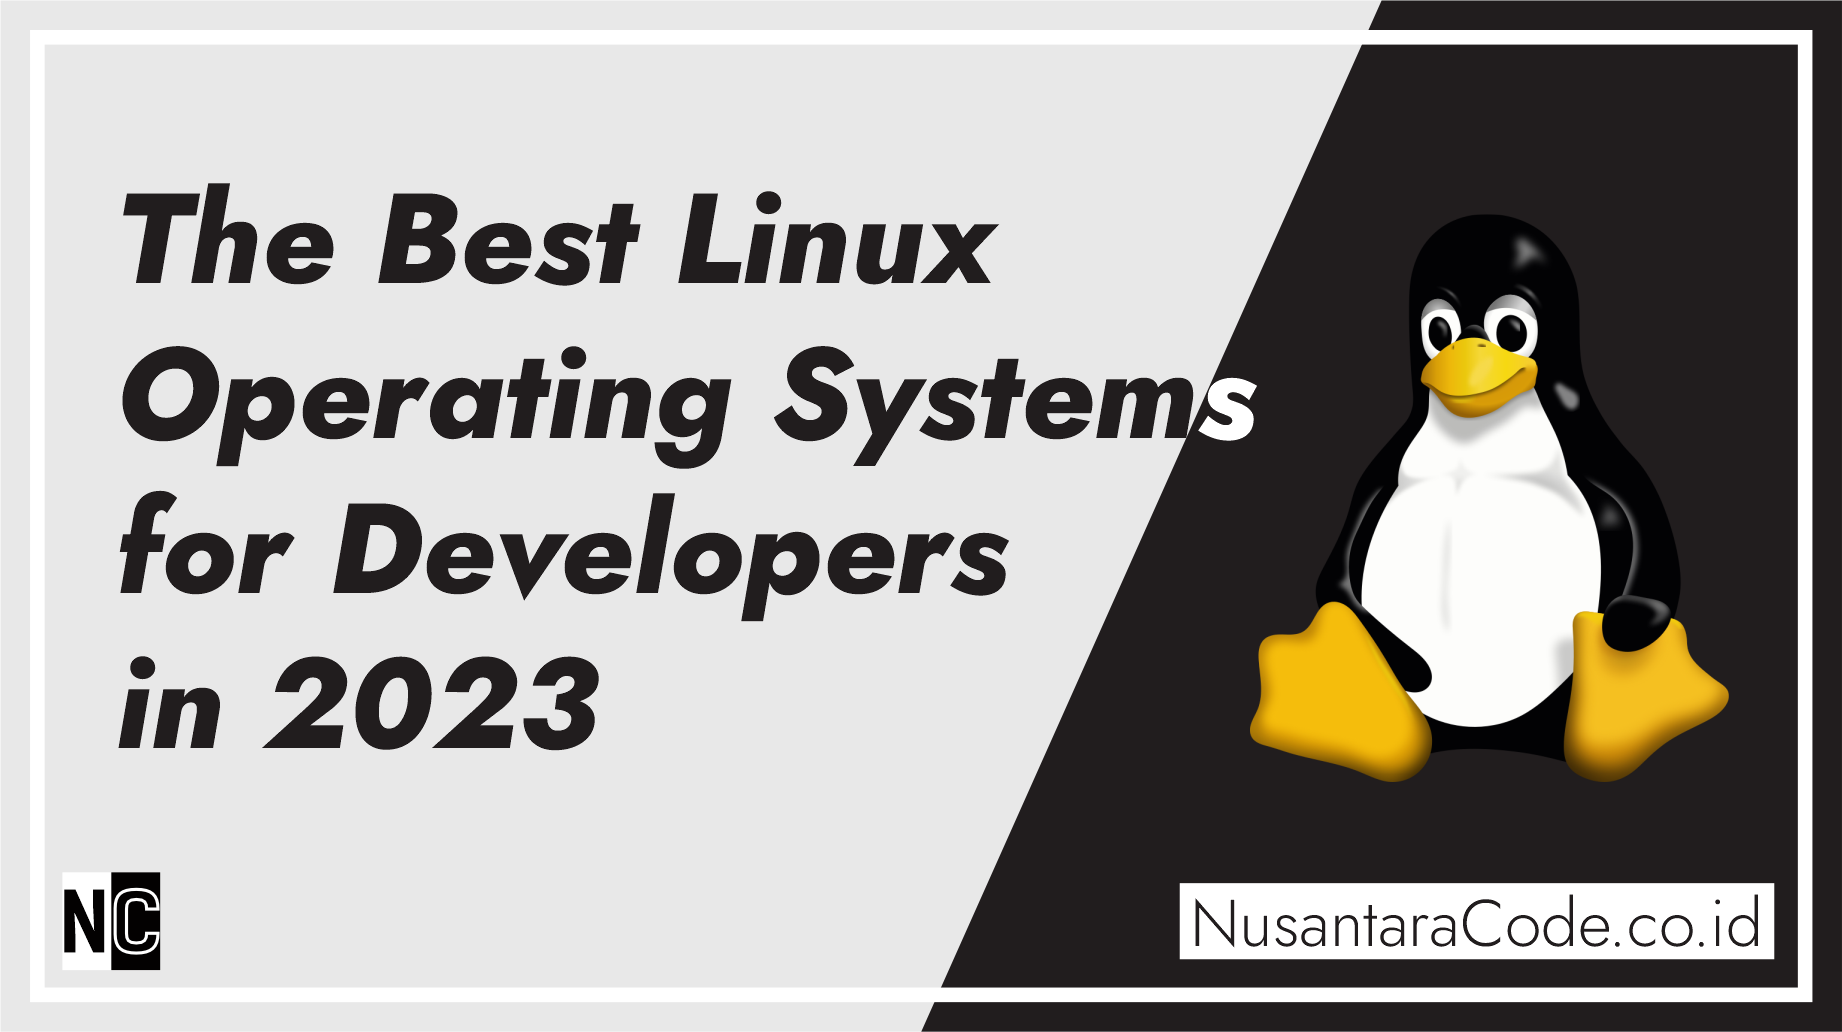 The Best Linux Operating Systems for Developers in 2023